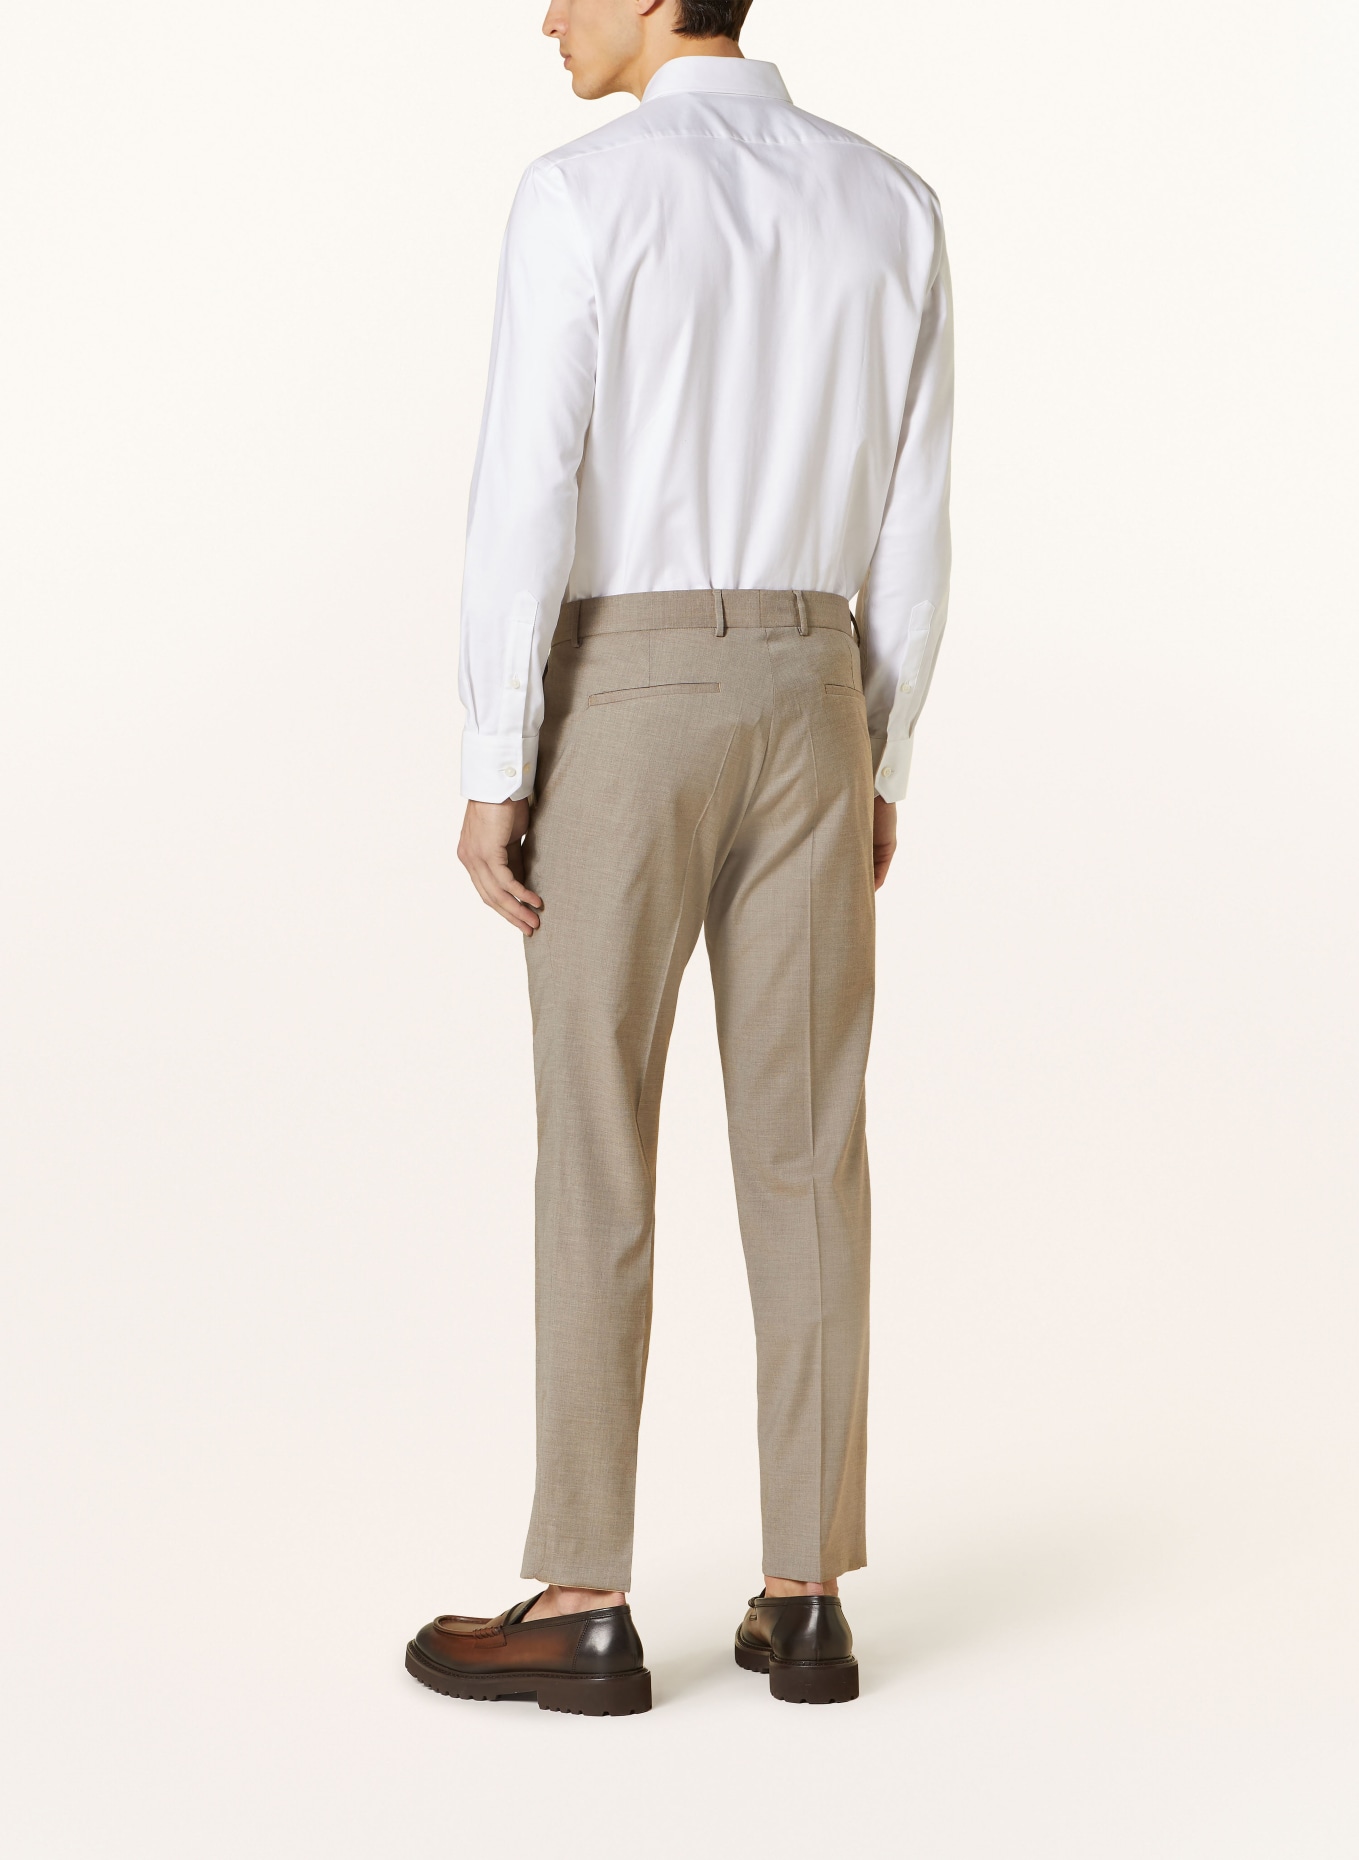 CG - CLUB of GENTS Suit trousers CG PACO slim fit, Color: 71 BRAUN HELL (Image 4)